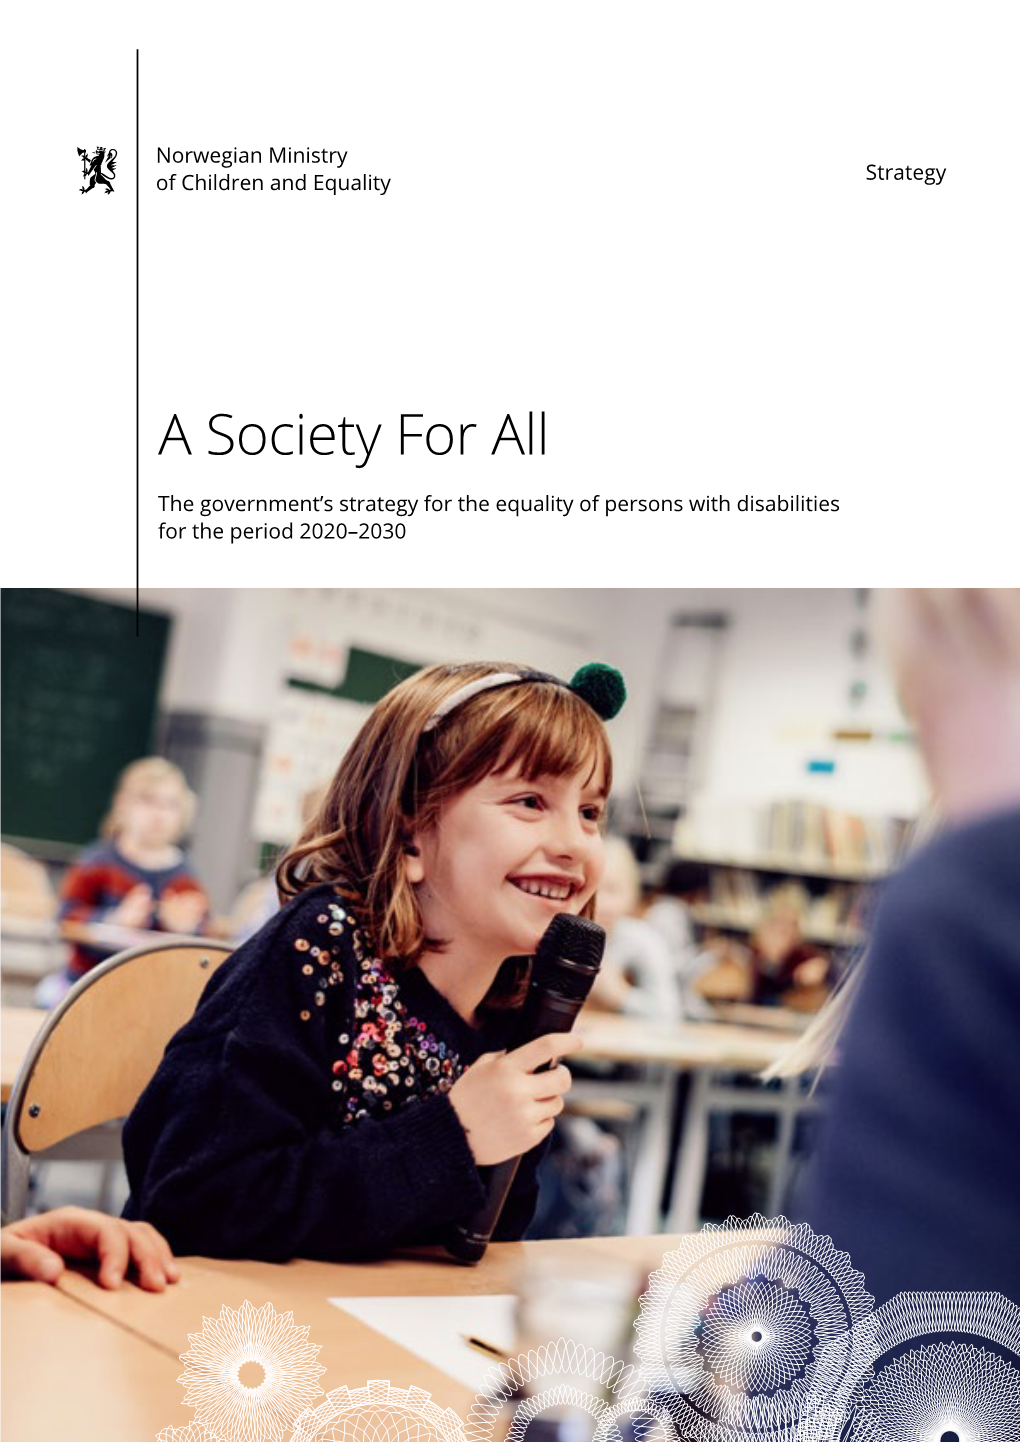 A Society for All – the Government's Strategy for the Equality of Persons